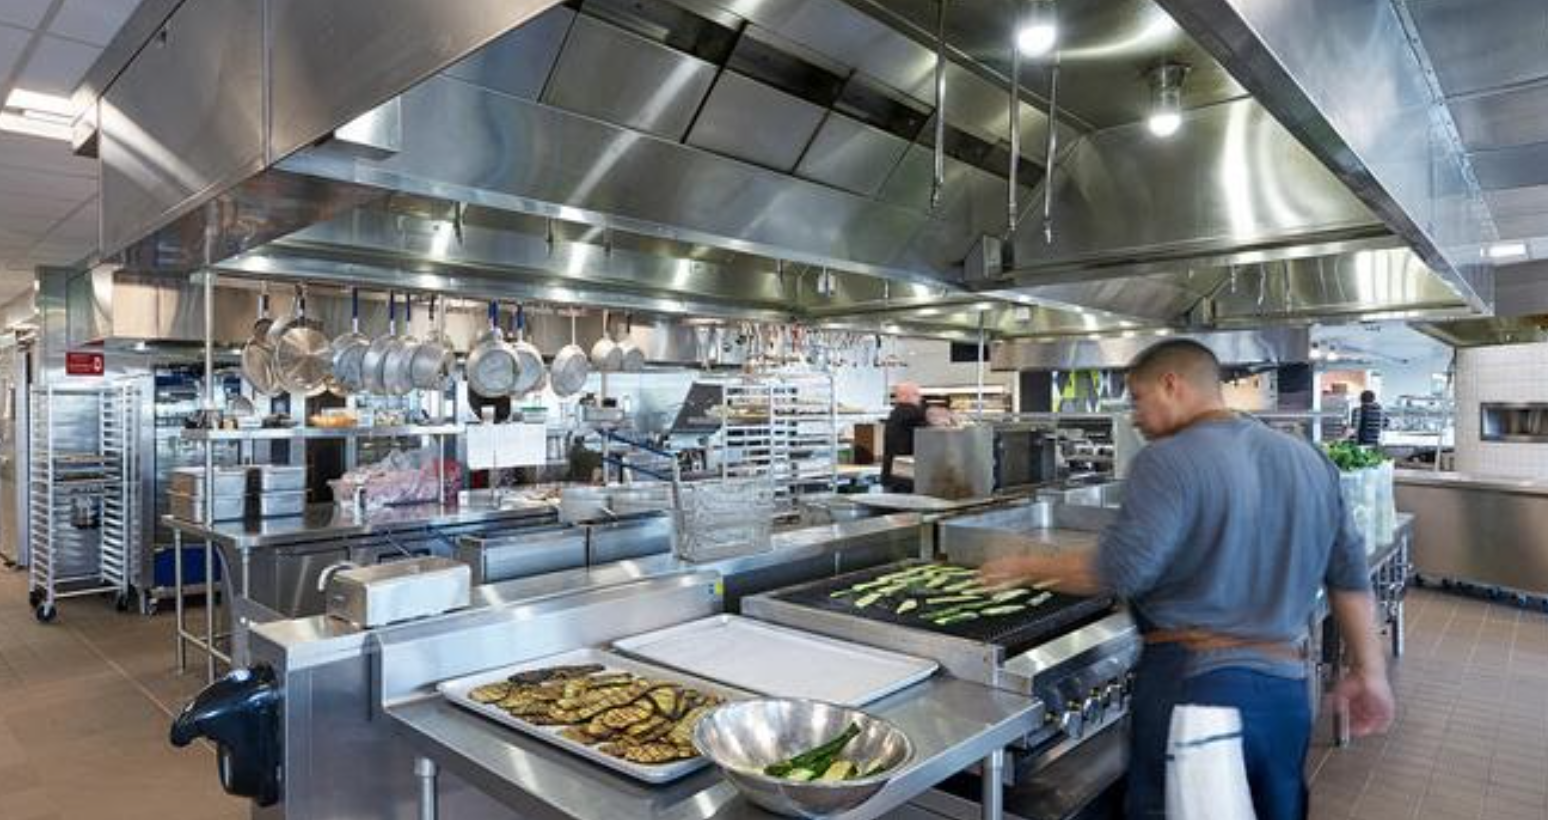 4 Reasons Why Your Business Should Have an On-Site Cafeteria - IMC Grupo